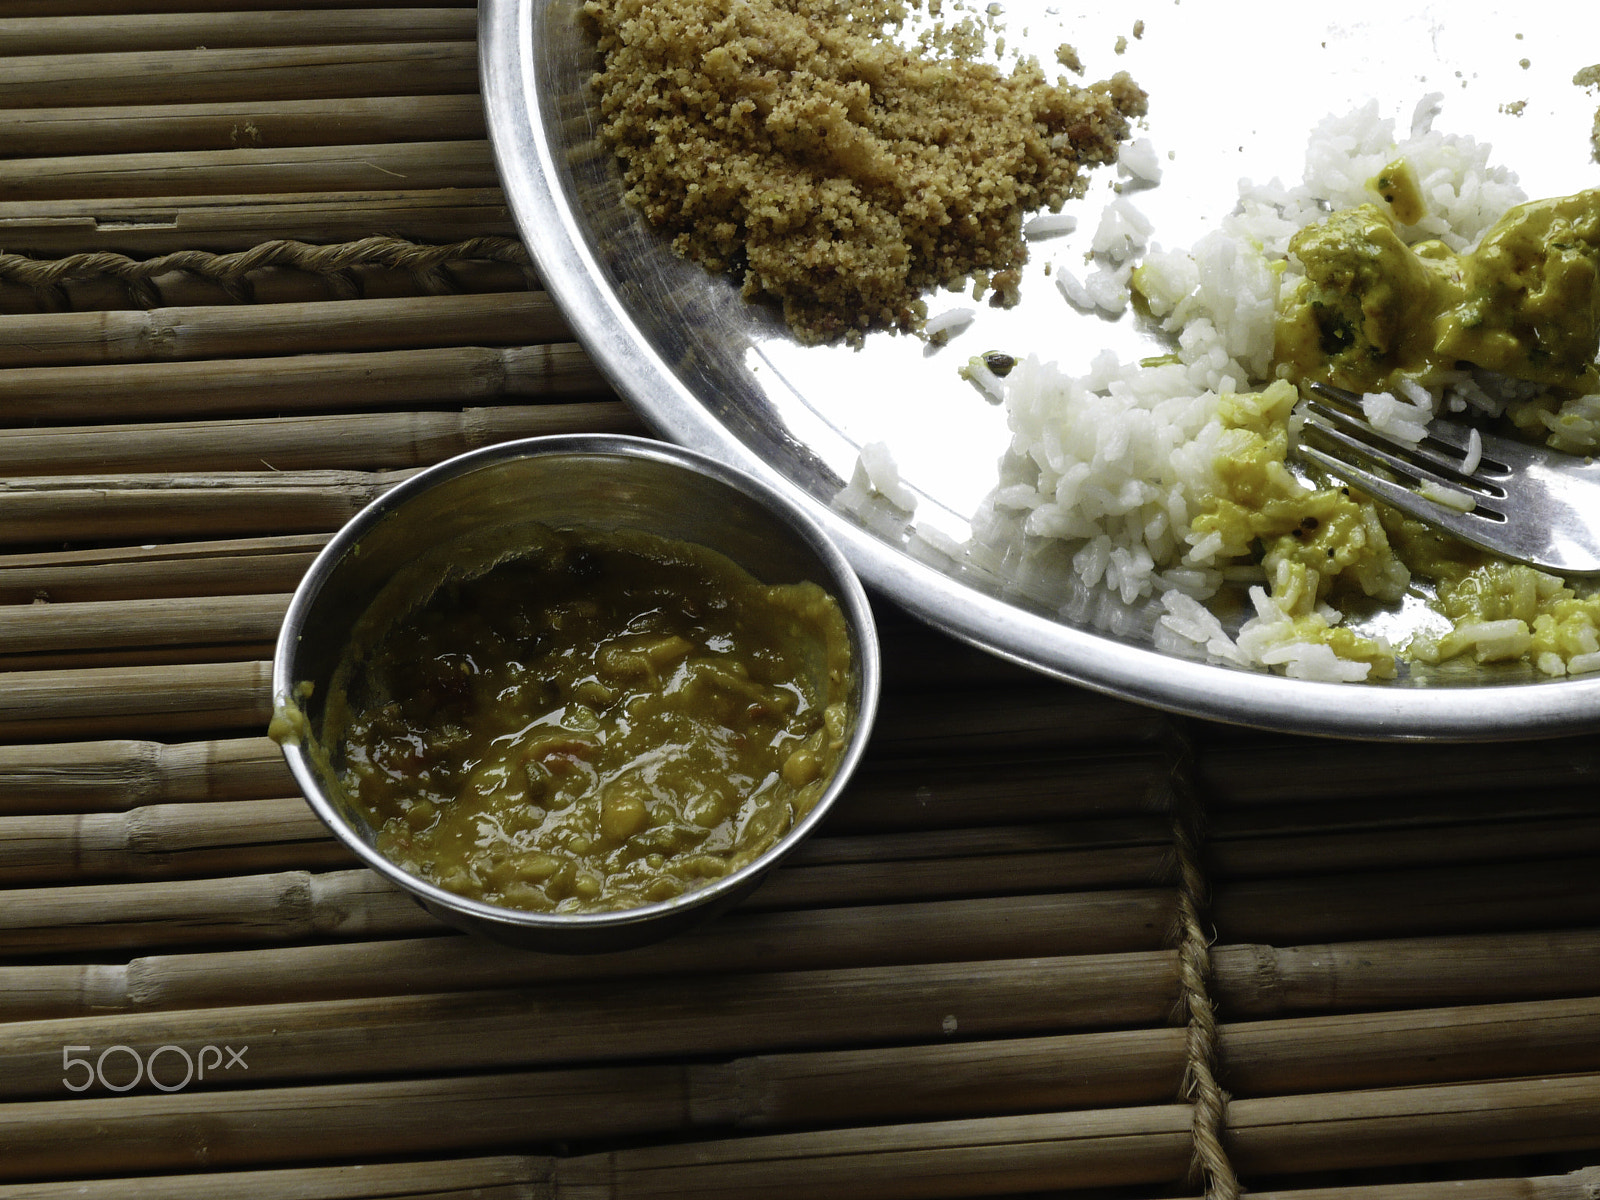 Panasonic DMC-FX100 sample photo. A typical plate of indian rajasthani food on a bamboo table photography